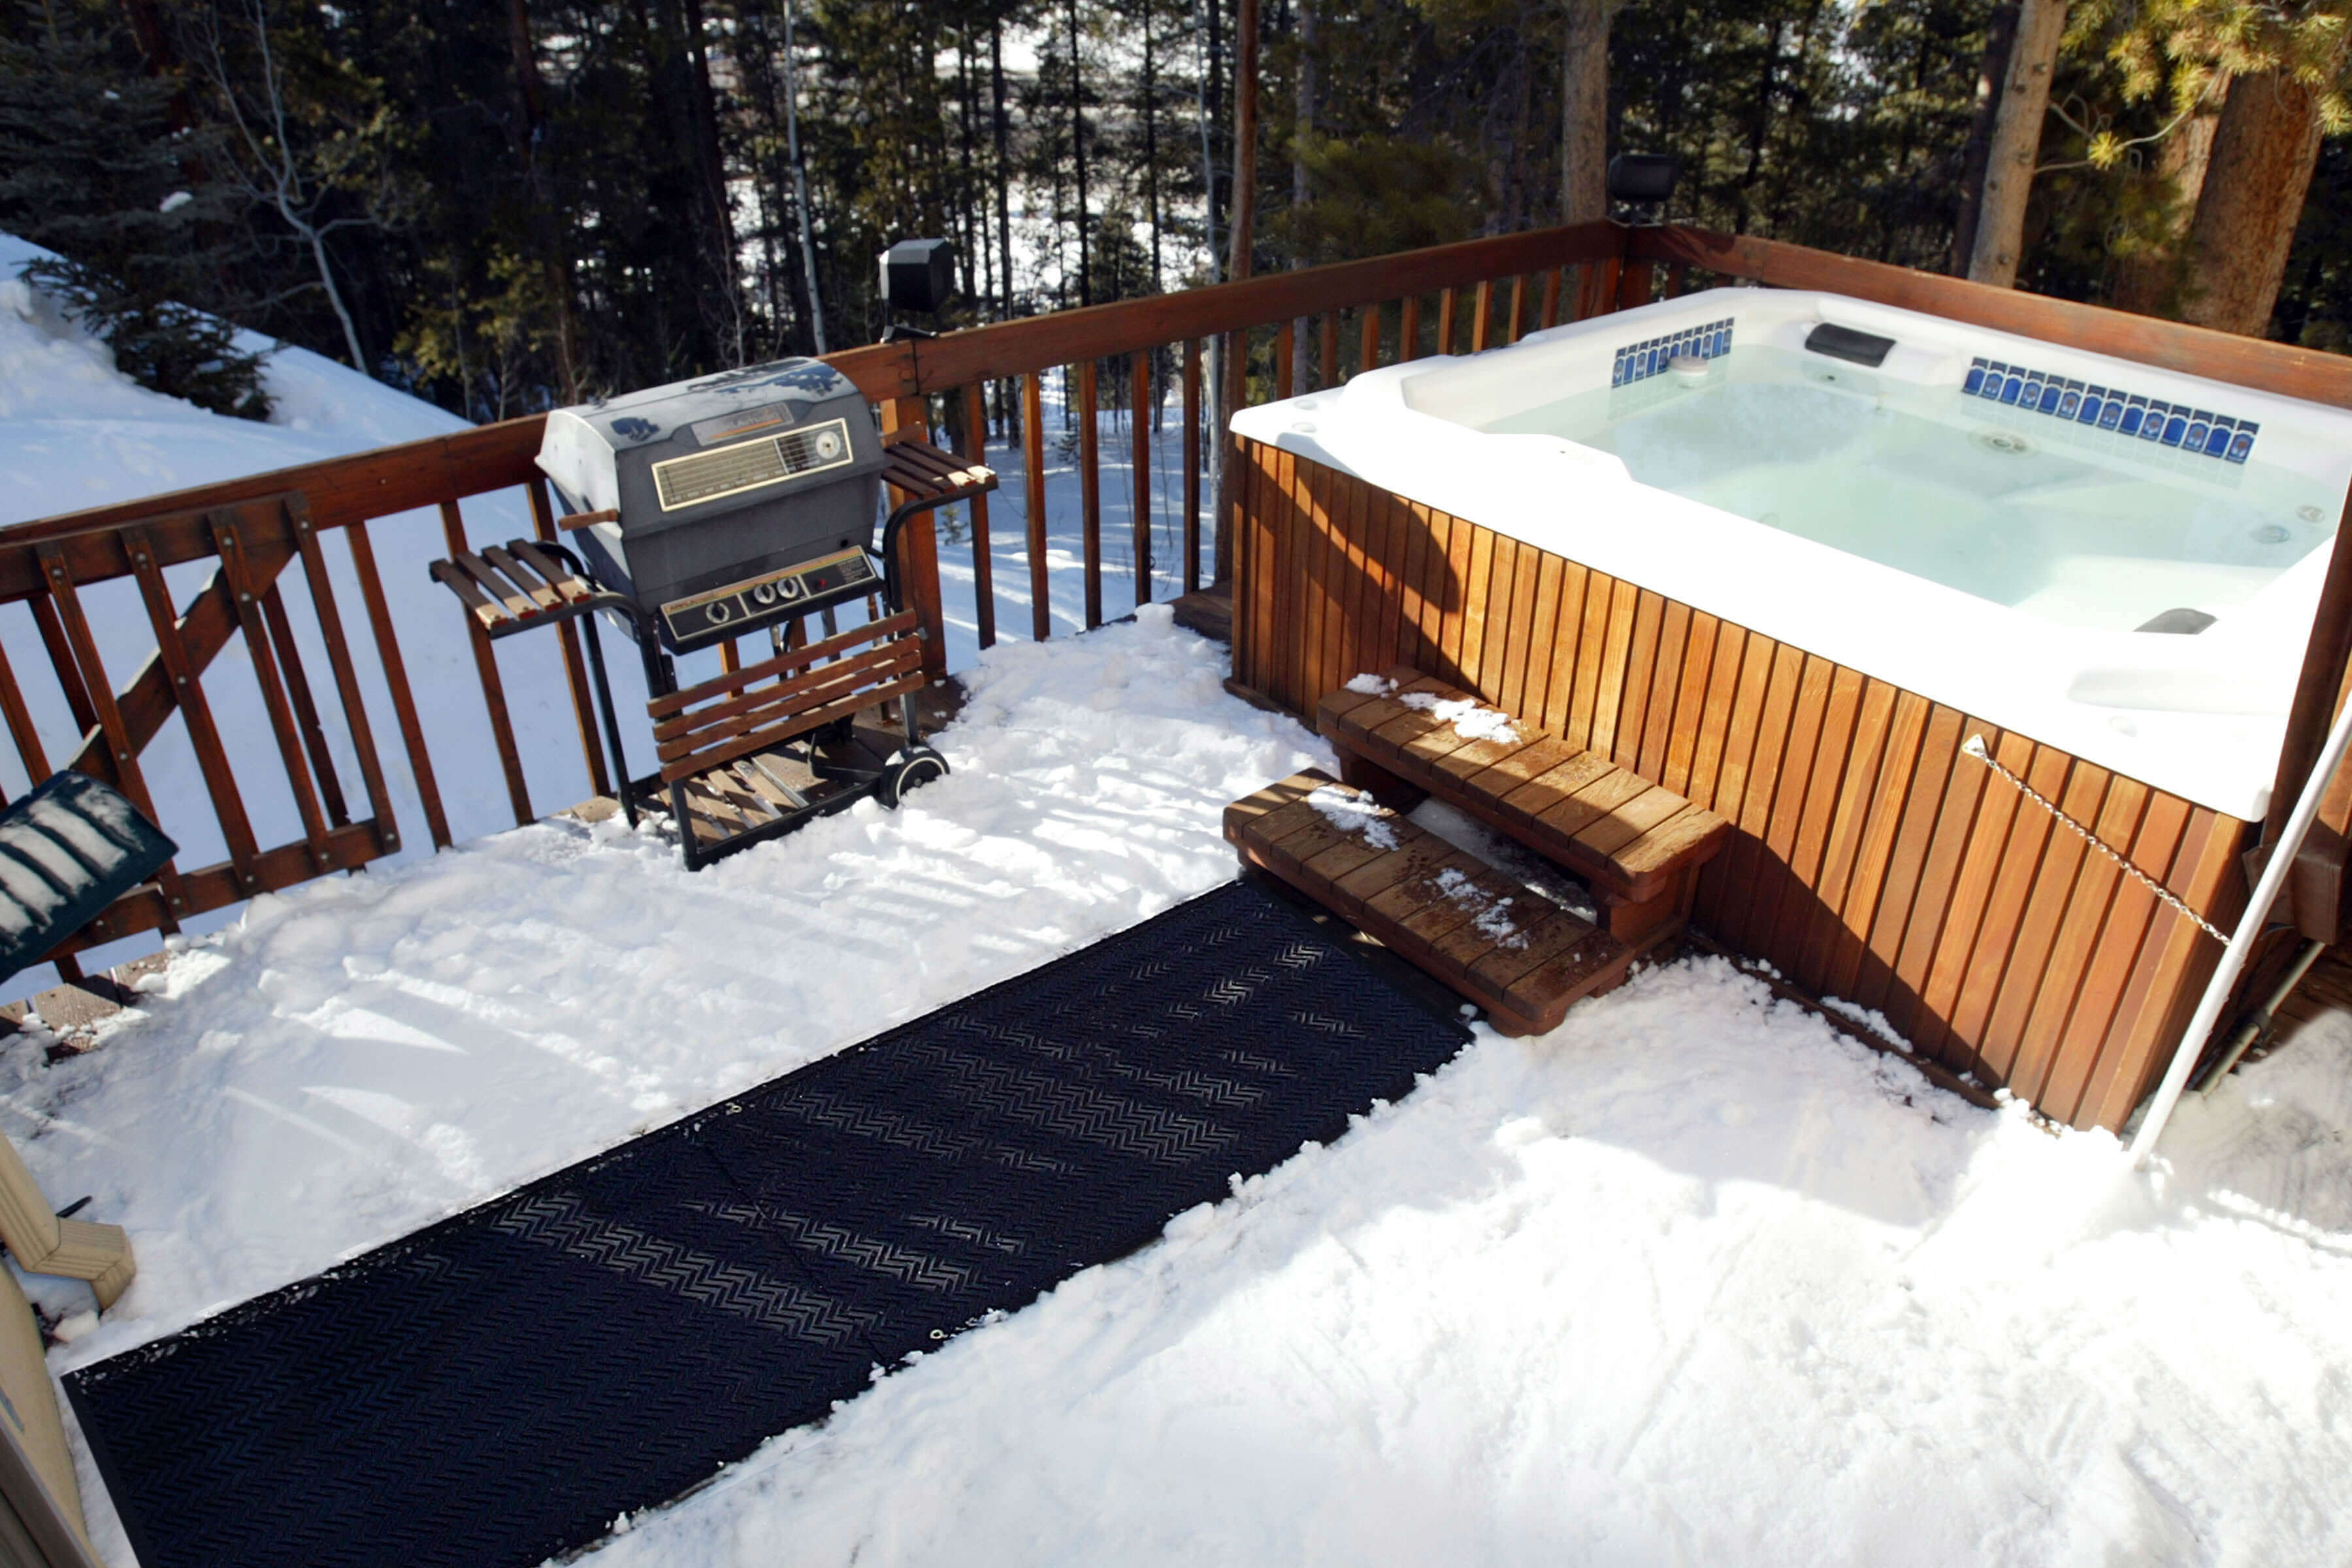 HeatTrak mat walkway on snow-covered deck, leading to steaming hot tub